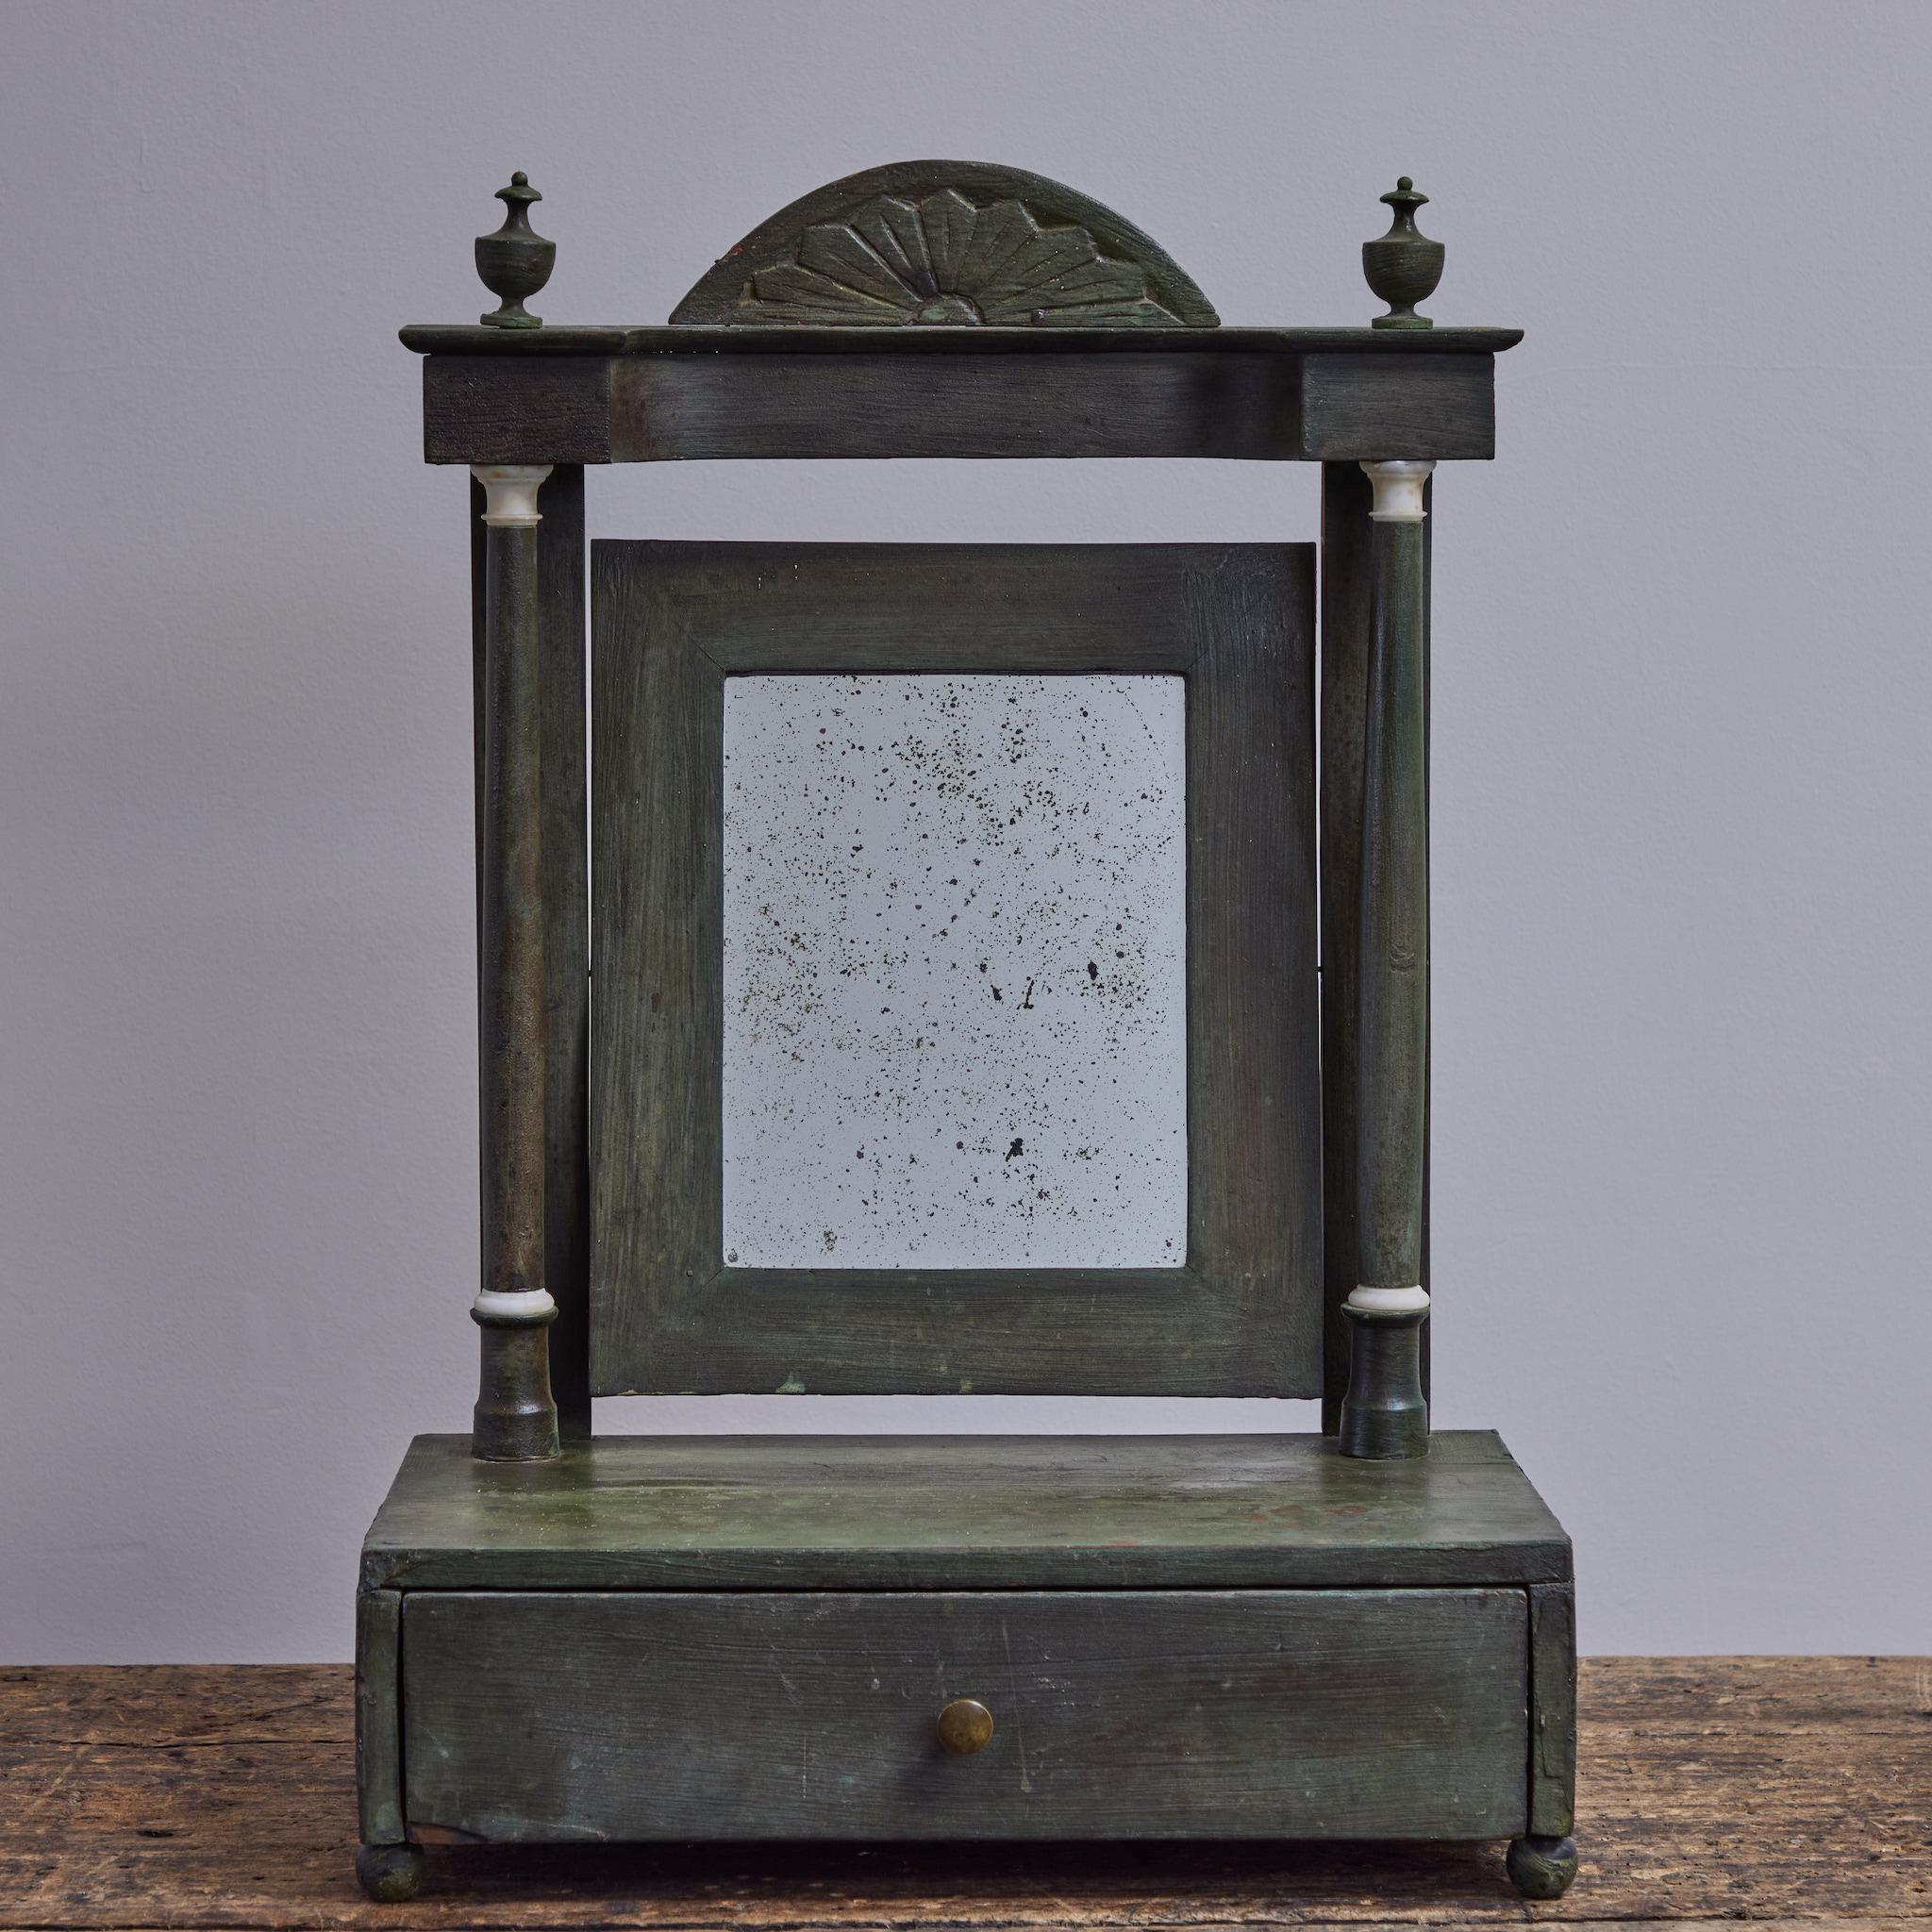 Green painted dresser mirror from 1840s England. The tilt mirror is flanked by two ionic columns and a floating frieze with carved fan pediment and urn finials. A rectangular base rests on ball feet and contains a drawer with a simple round brass